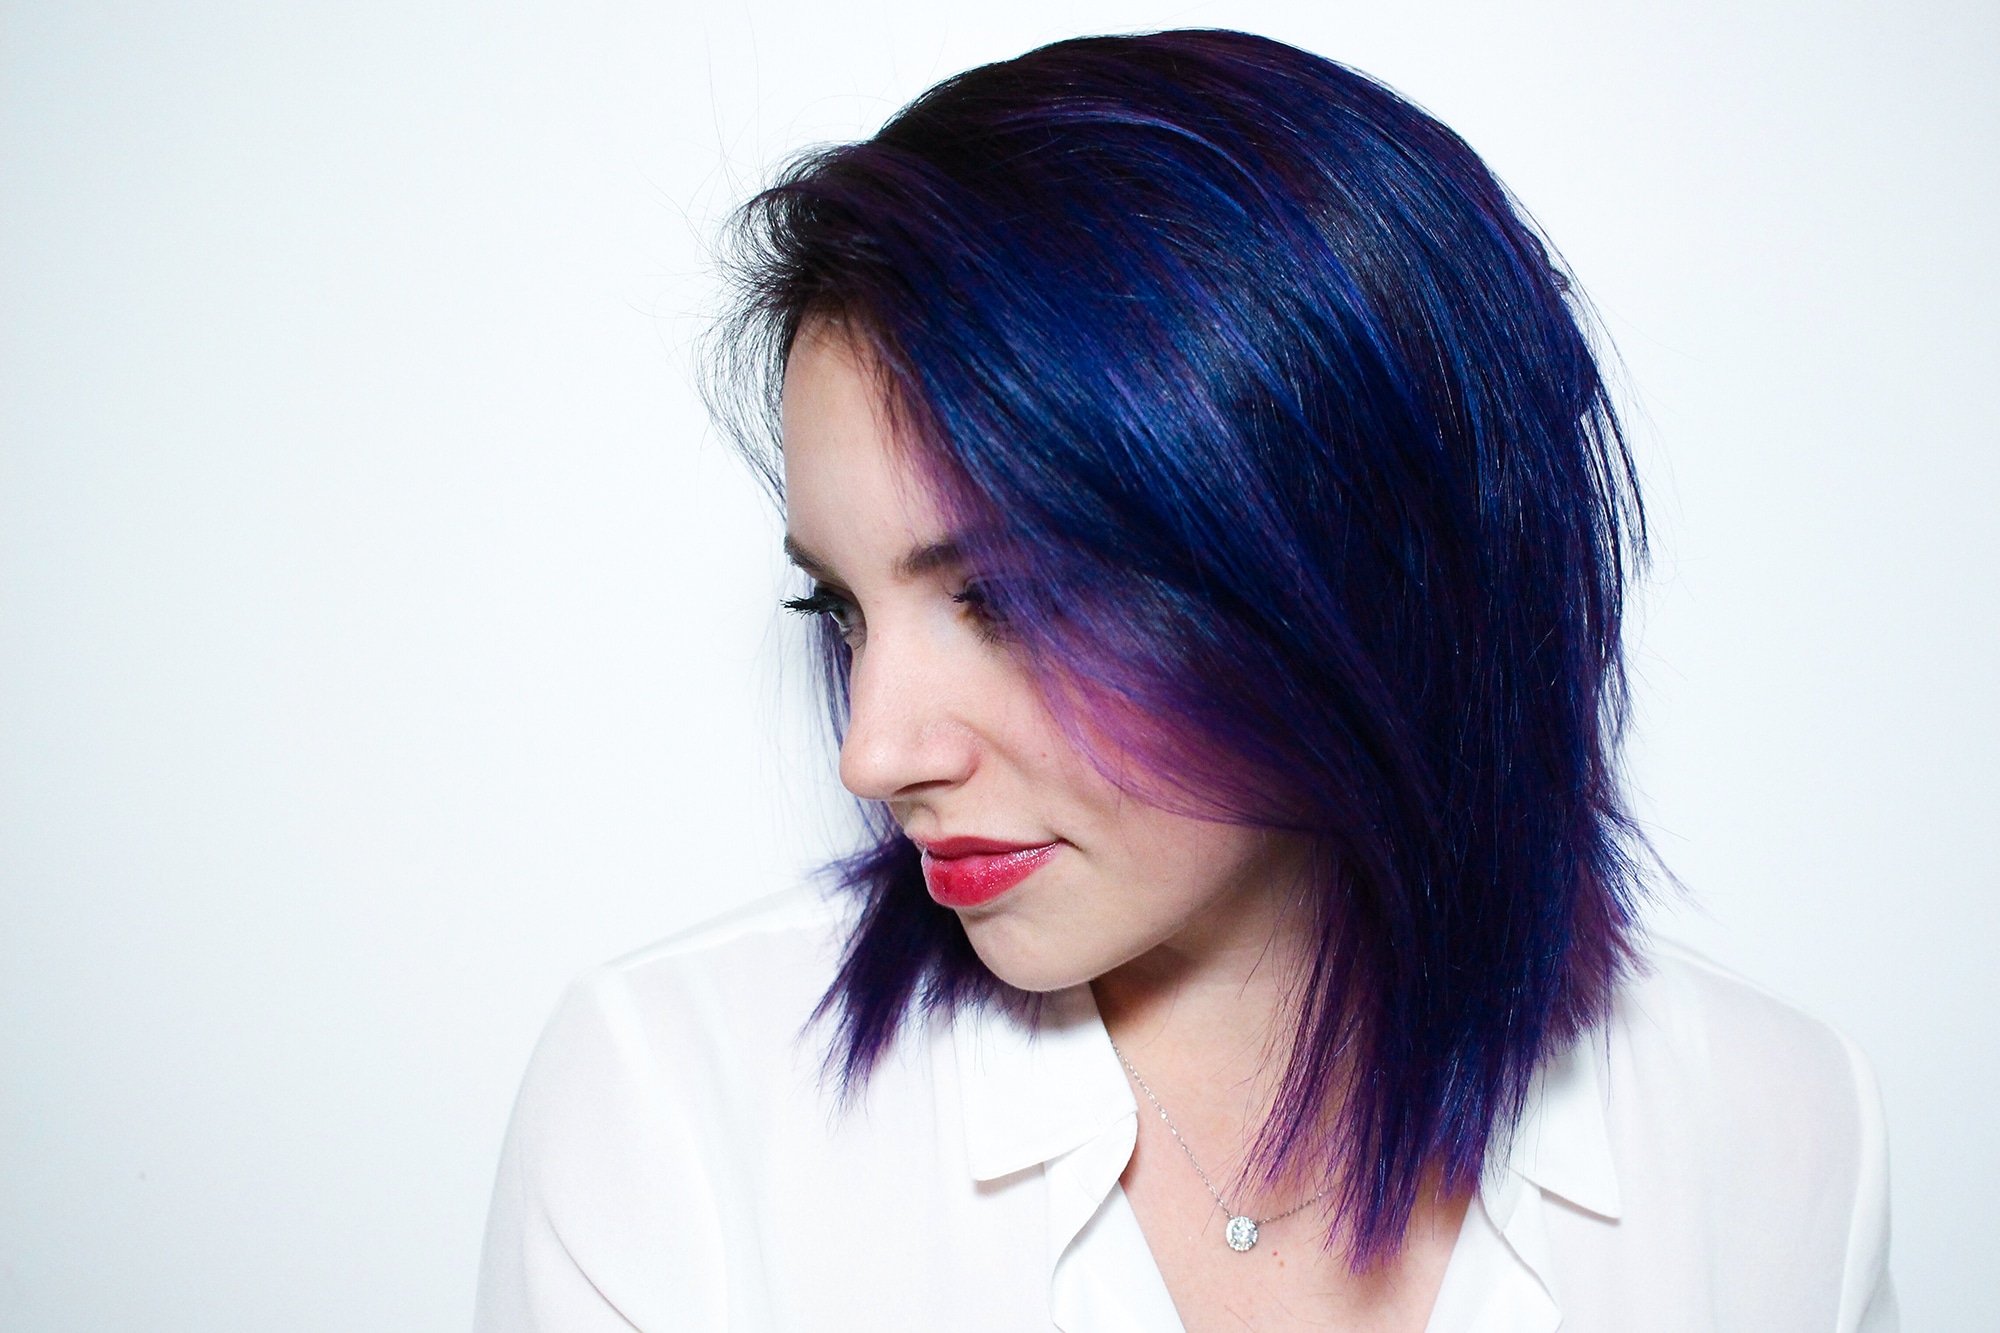 10. How to Remove Dark Blue Hair Dye Safely - wide 6